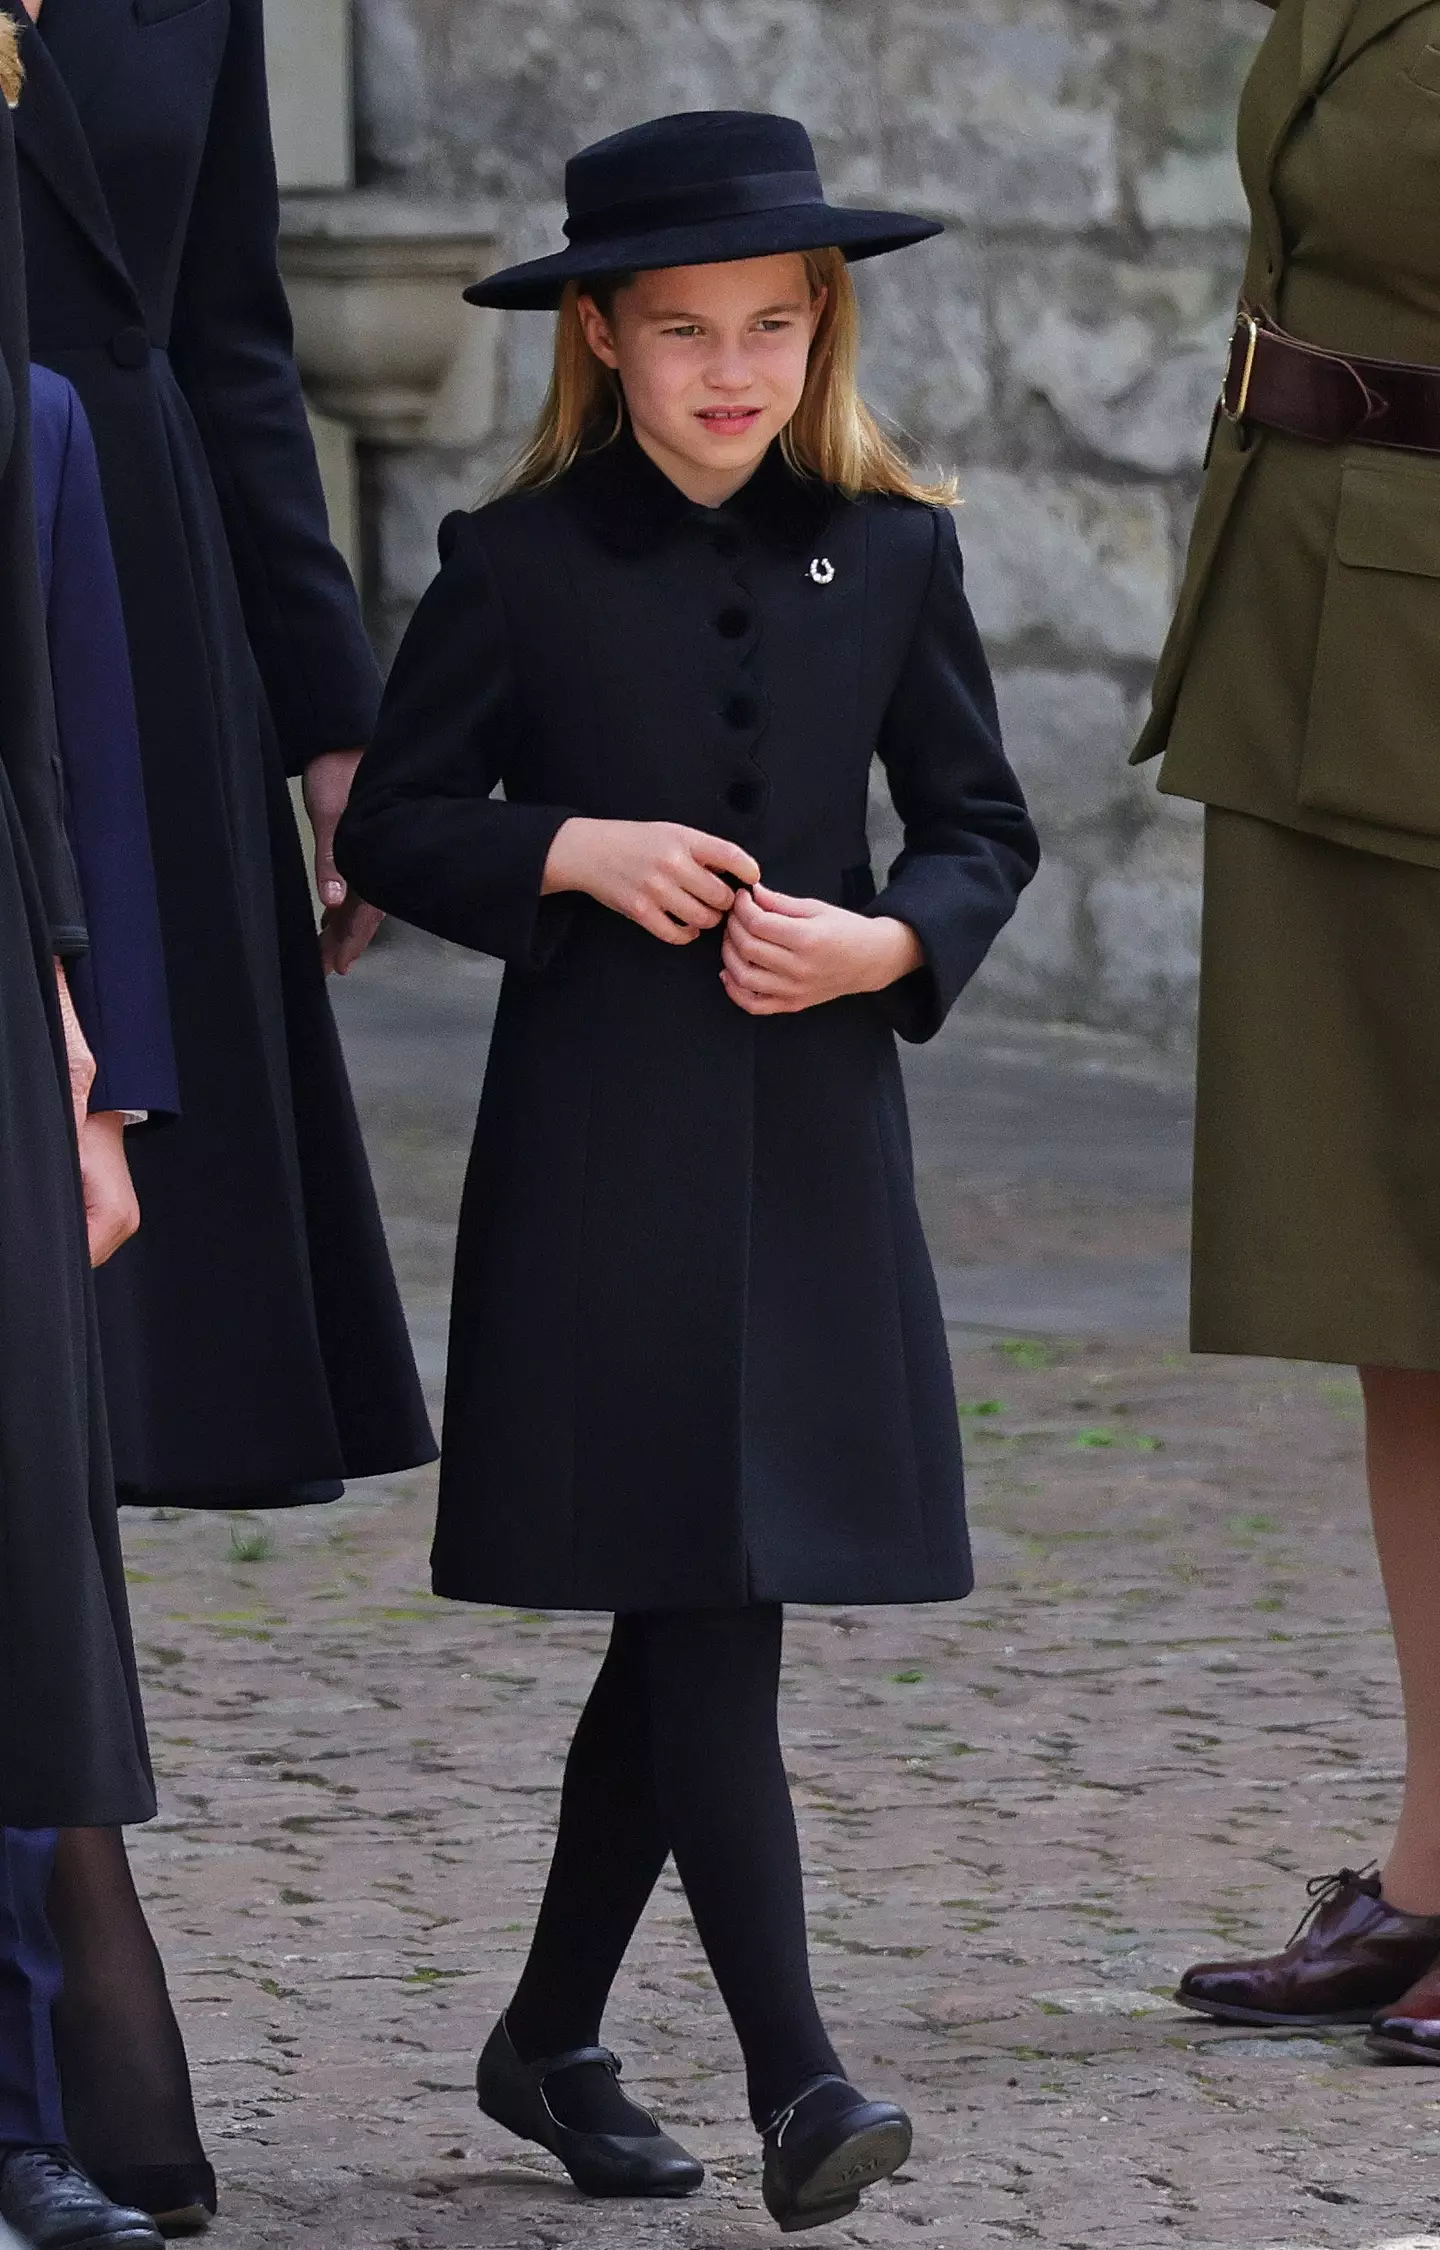 Princess Charlotte, seen wearing a horseshoe-shaped broach, walked behind the coffin with her family.